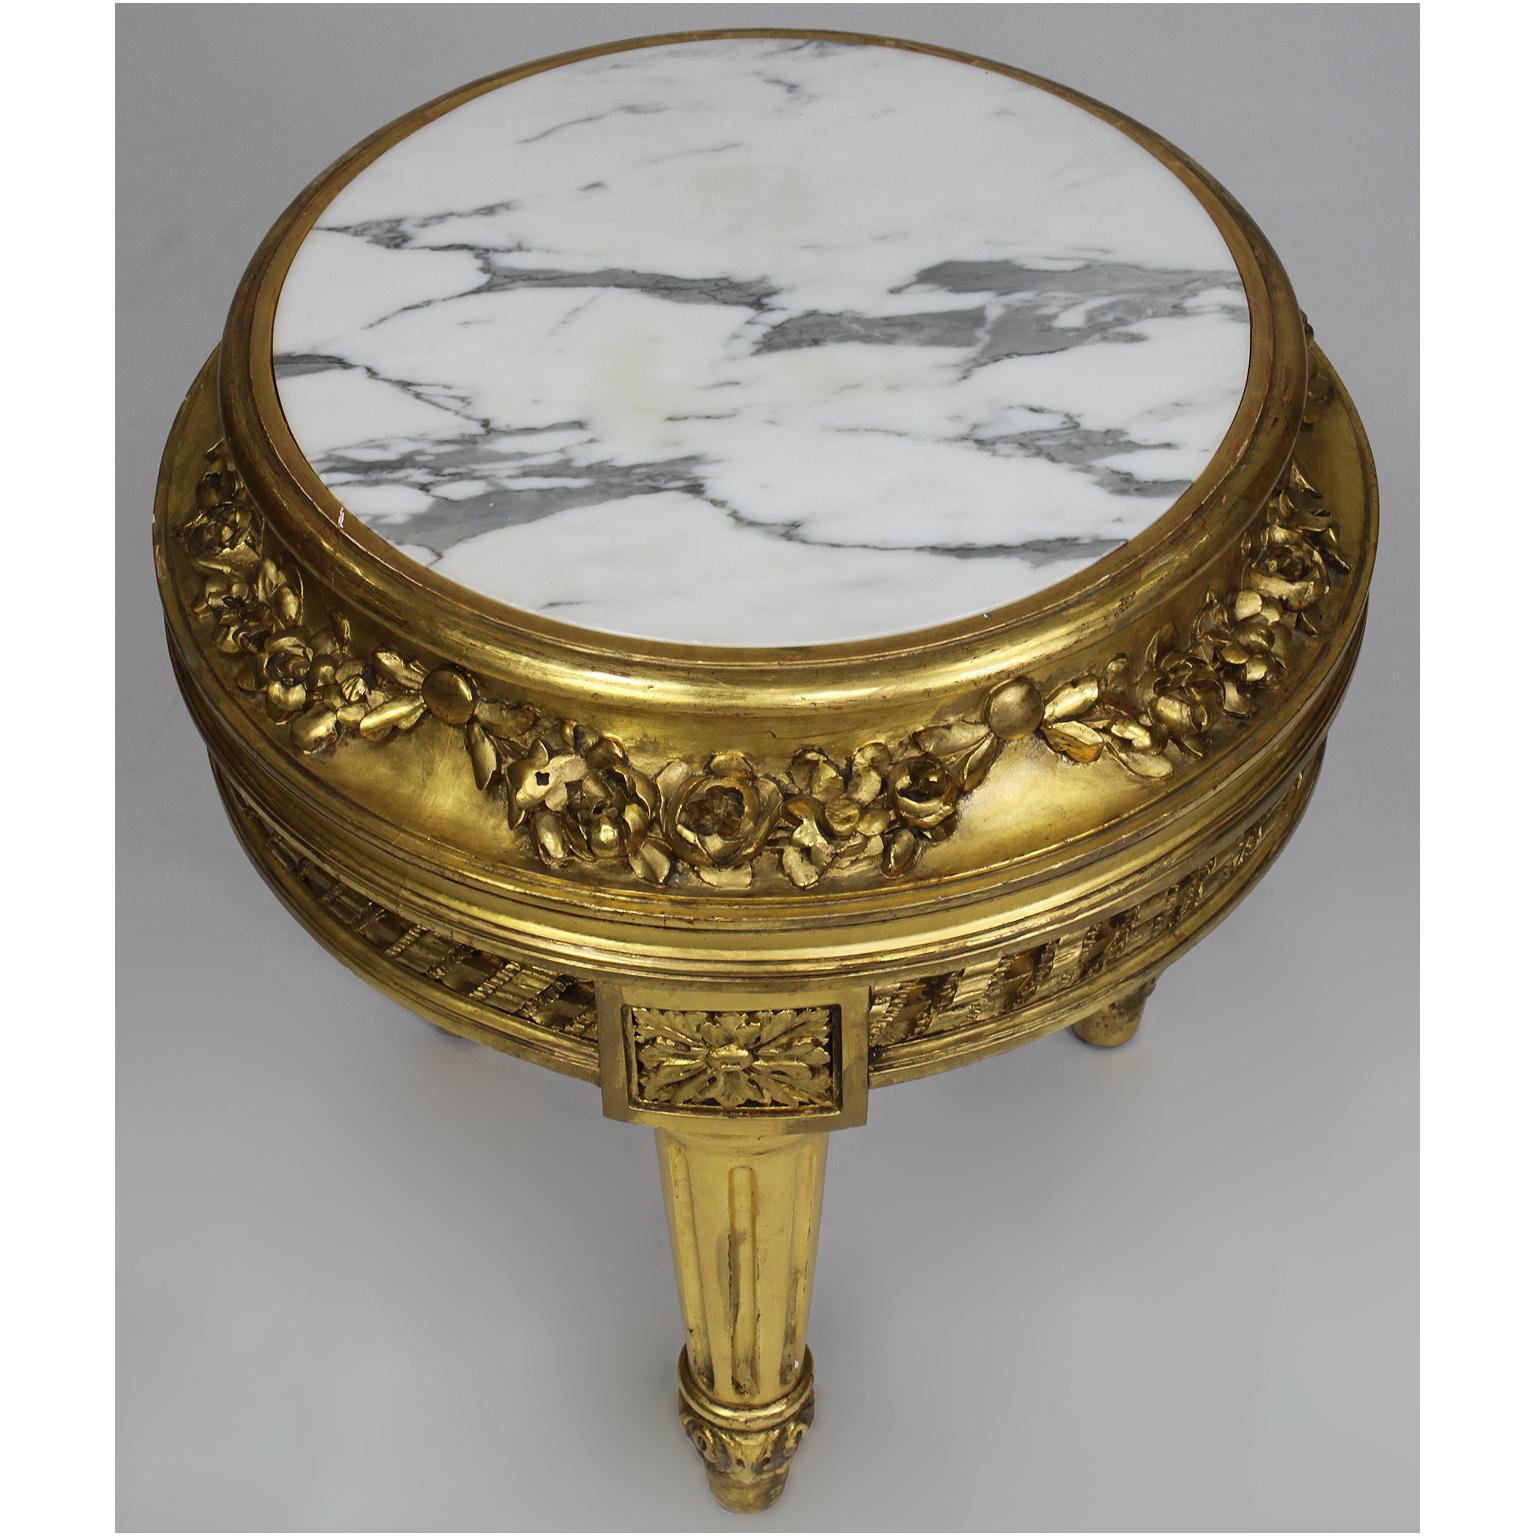 Hand-Carved Belle Époque Louis XVI Style Giltwood Carved Pedestal Stand with Marble Top For Sale